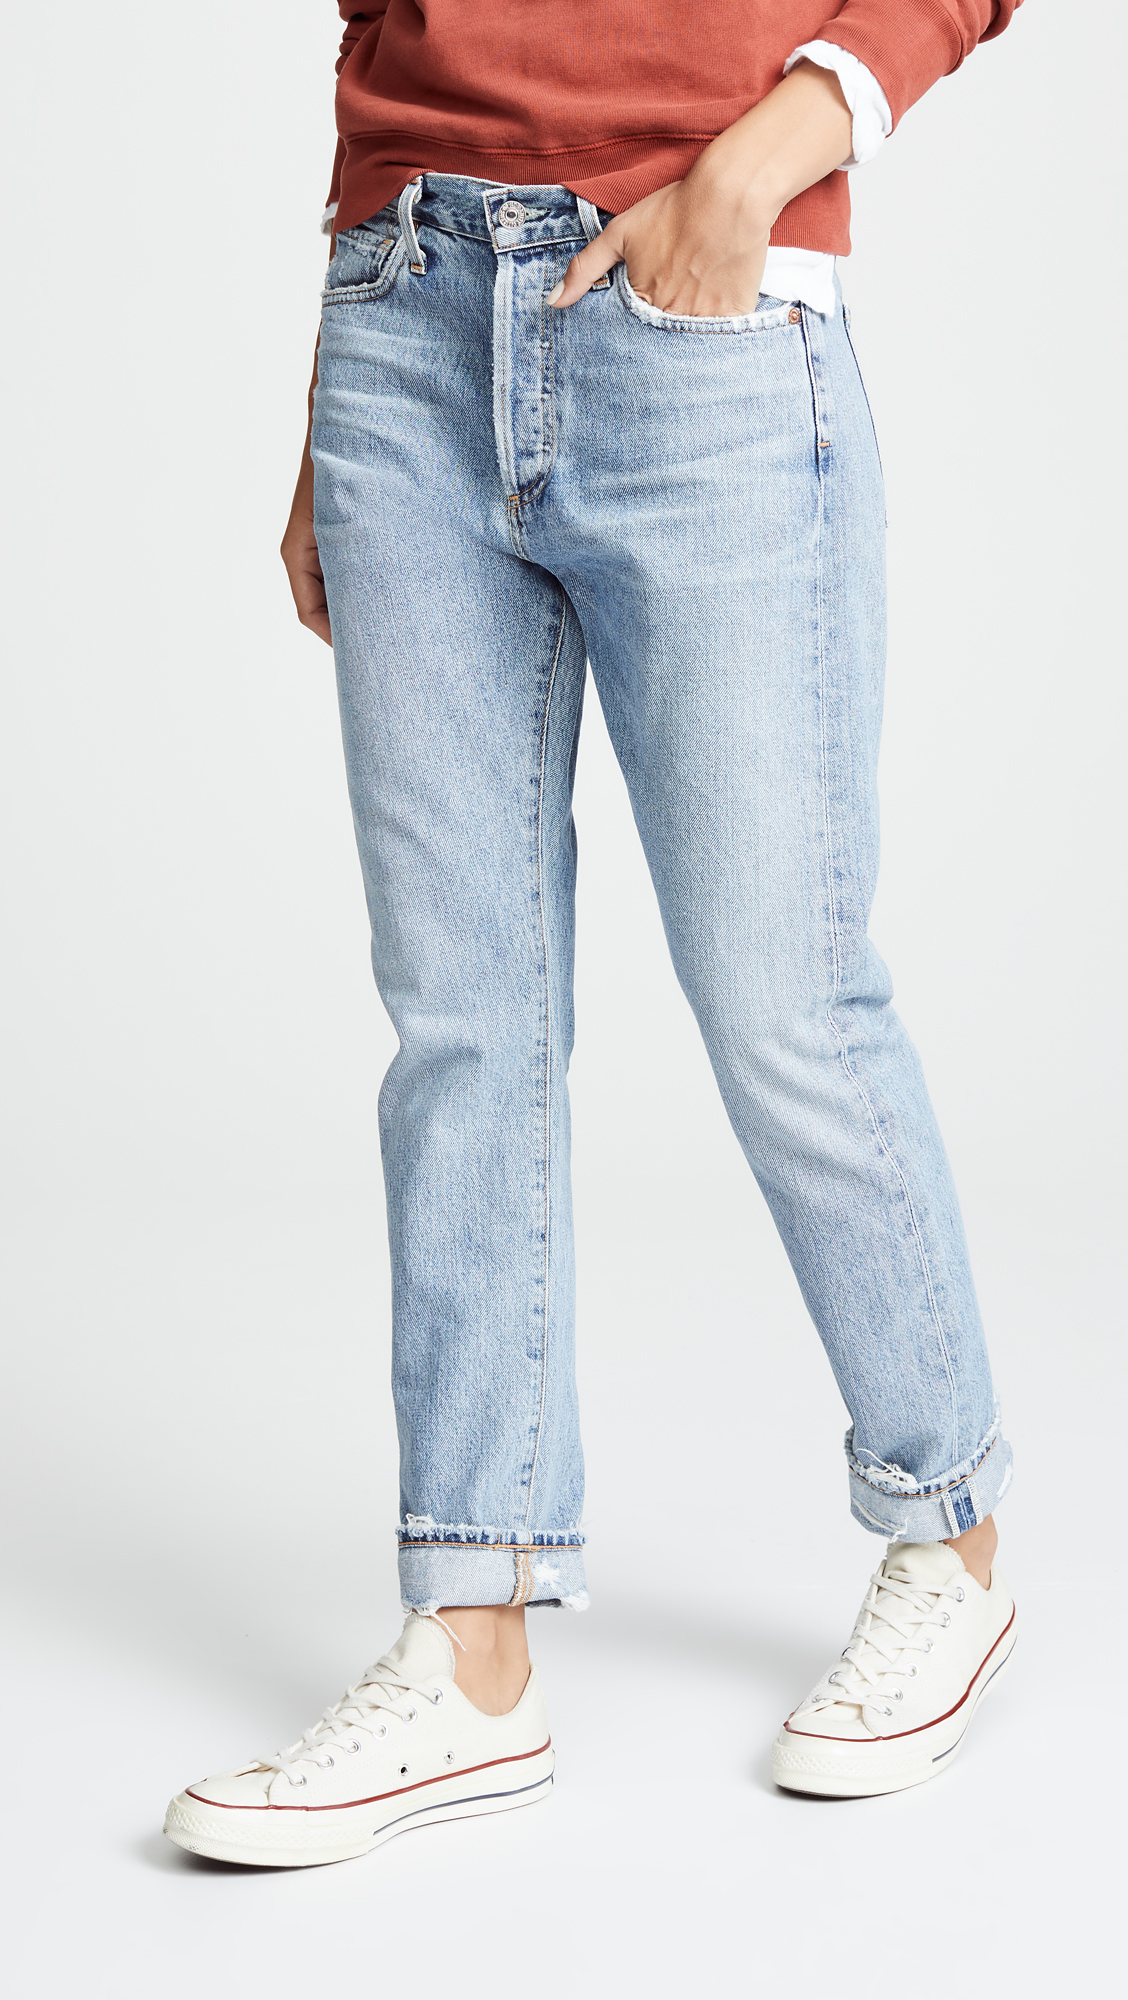 slouchy-slim-jeans-non-stretch-denim-womens-citizens-of-humanity